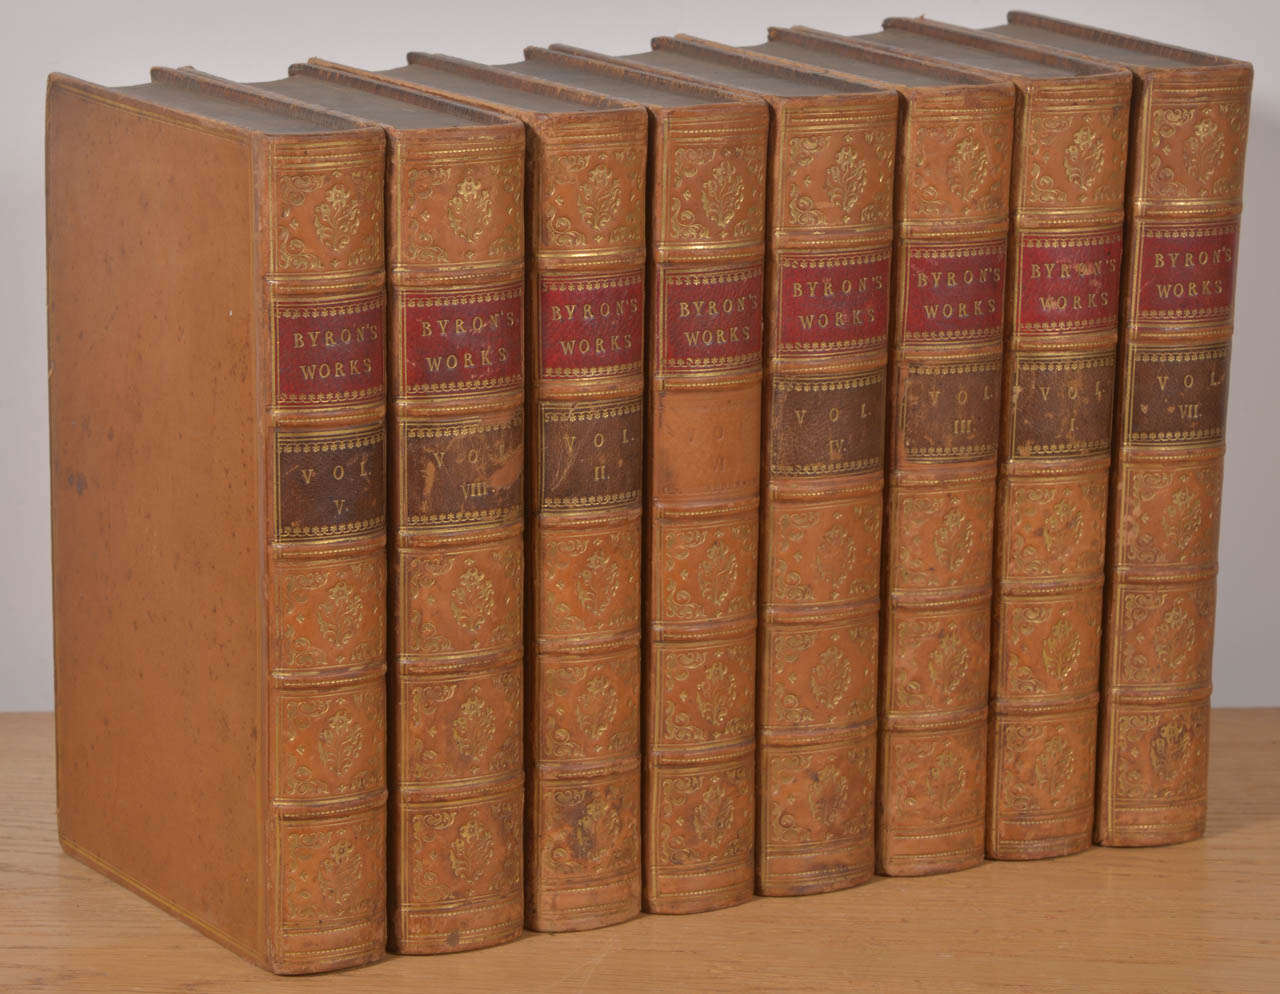 The Poetical Works of Lord Byron, in Eight Volumes. Published by John Murray, London, 1839. This complete set is in great shape. Perfect for the literary collector!